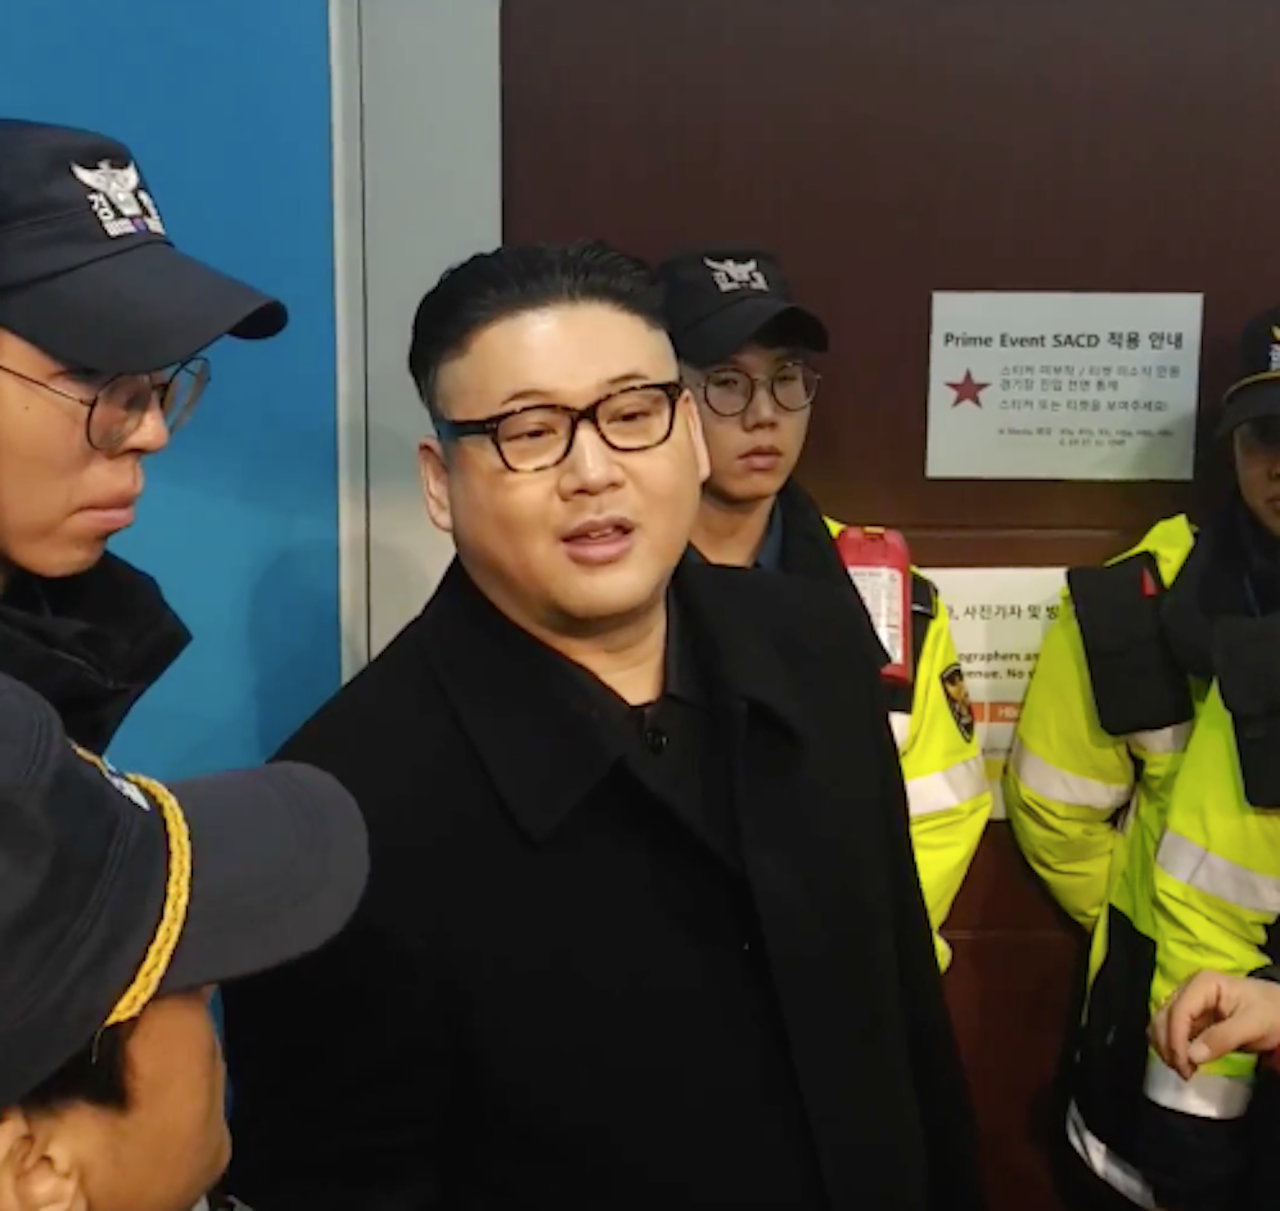 Kim Jong-un Impersonator Appears at National Security Law 